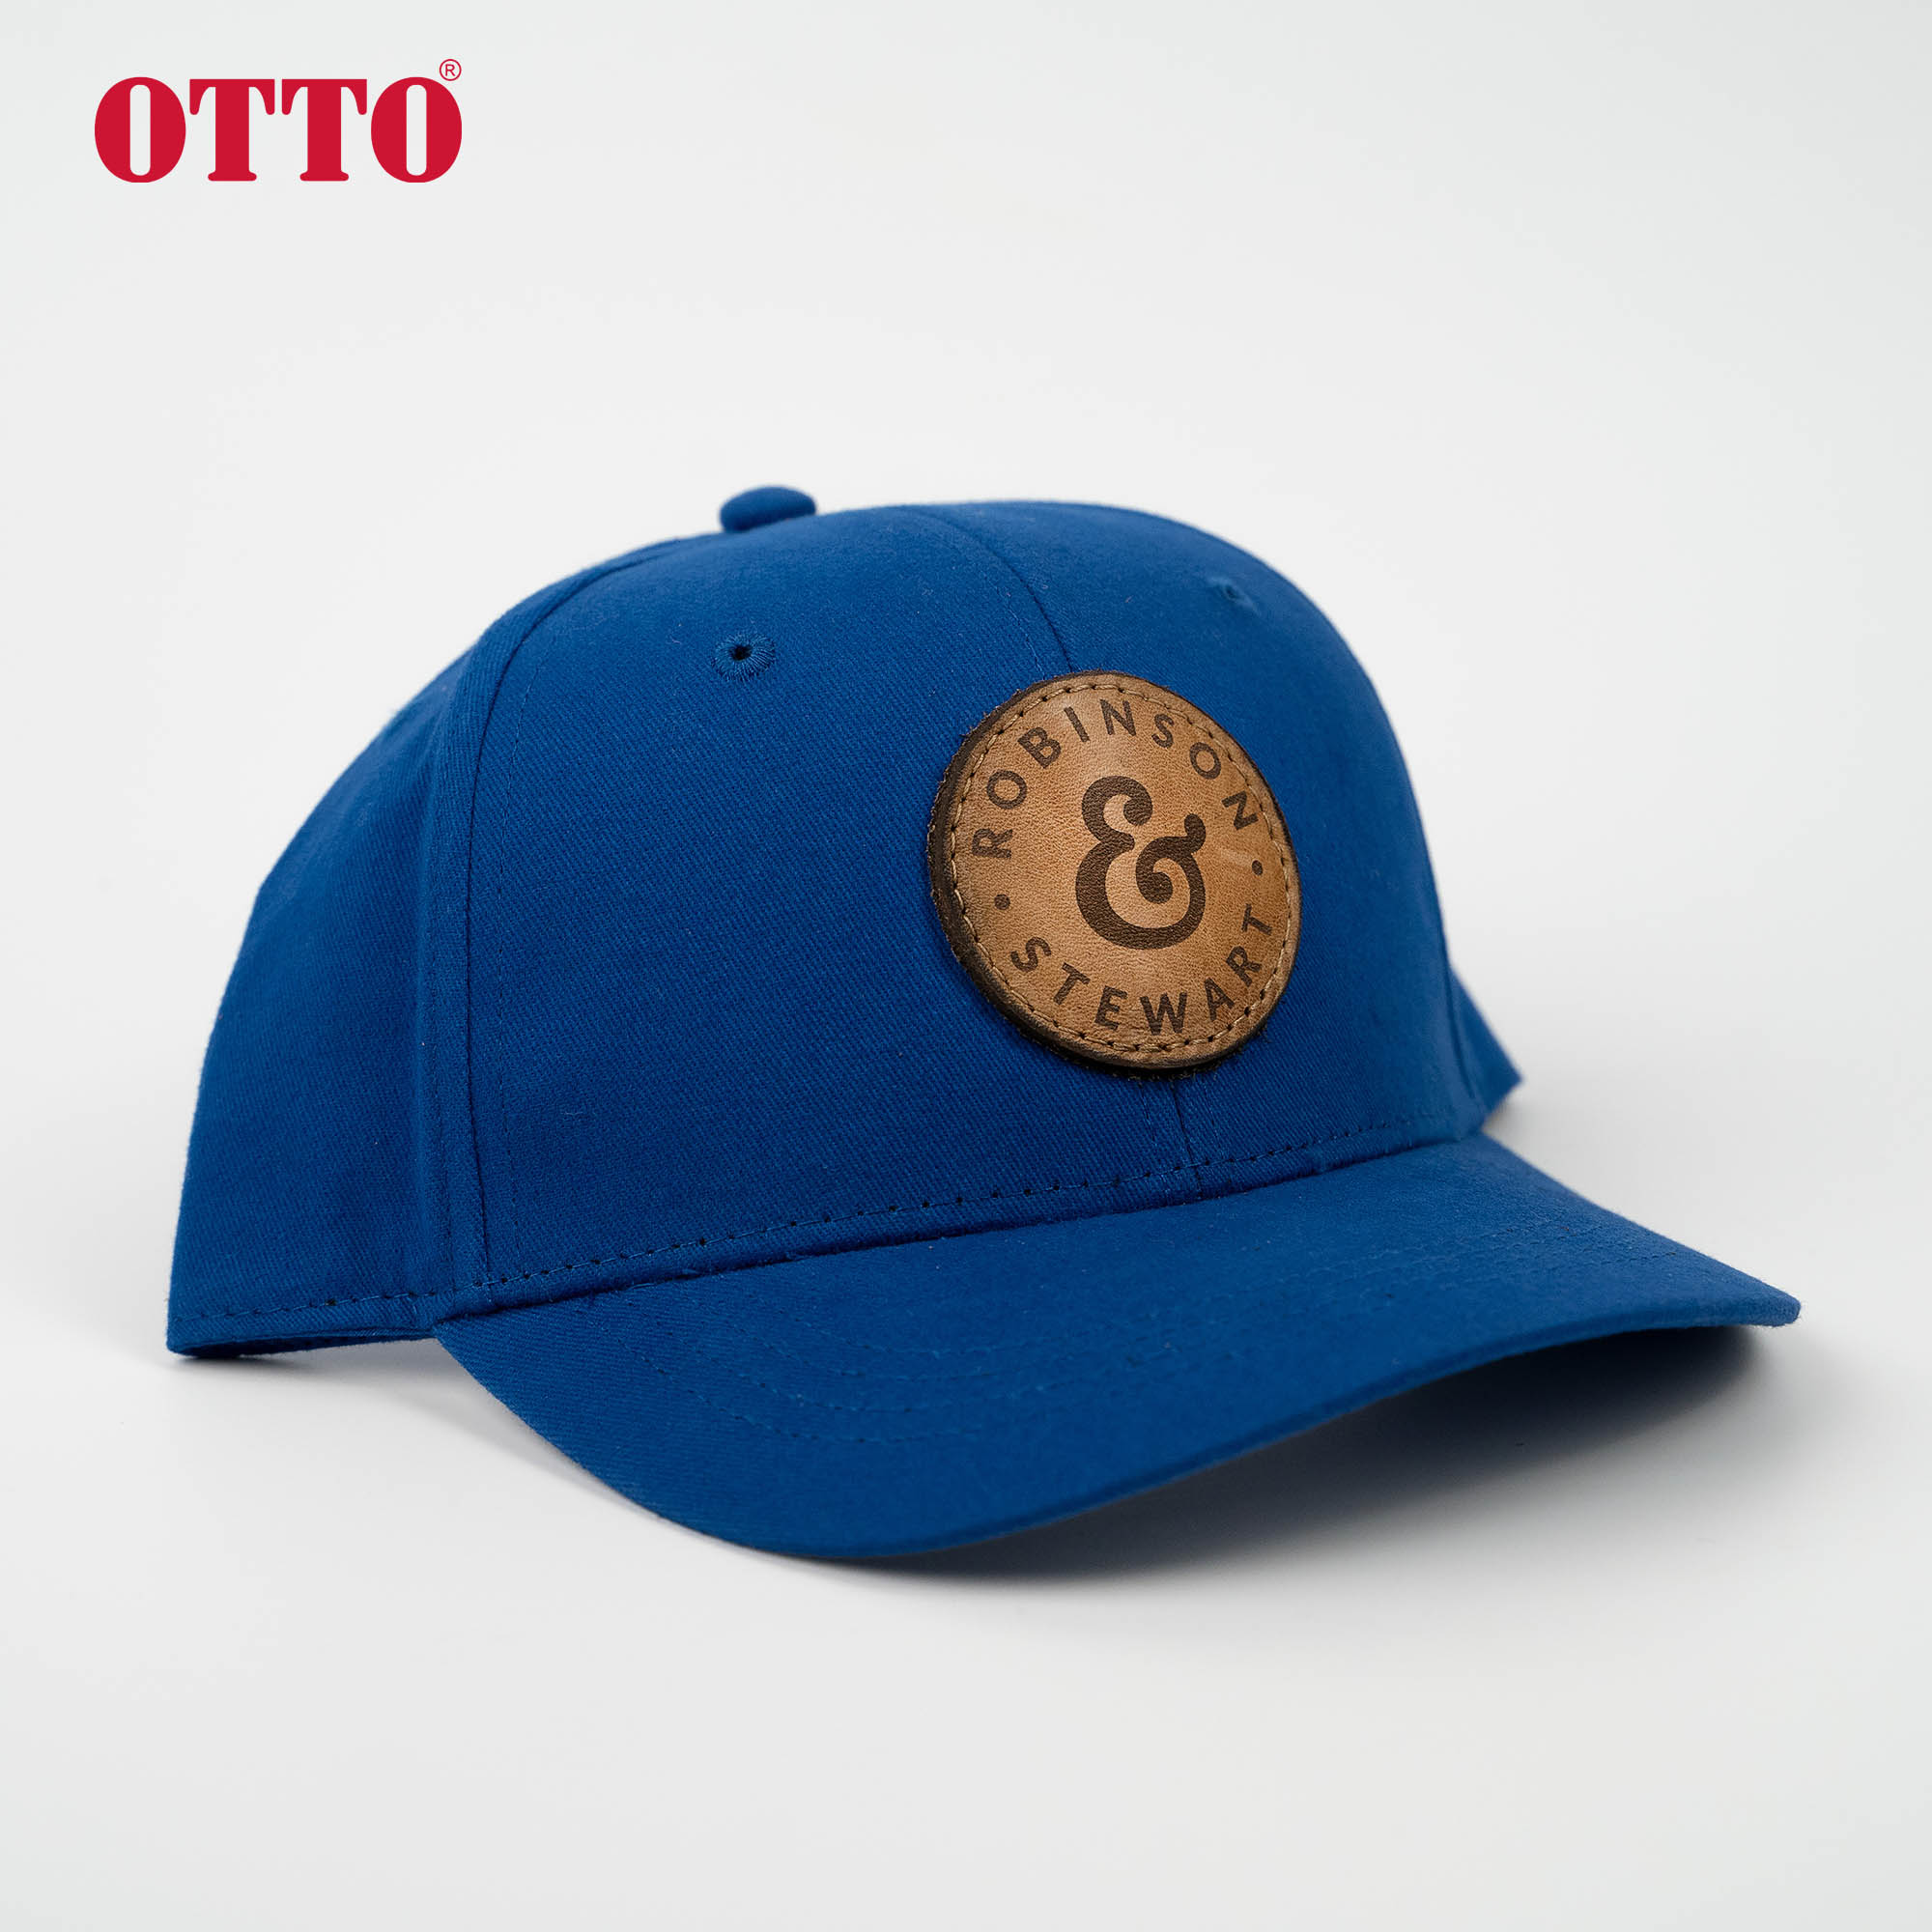 Blue OTTO youth 6 panel baseball cap with a custom leather patch